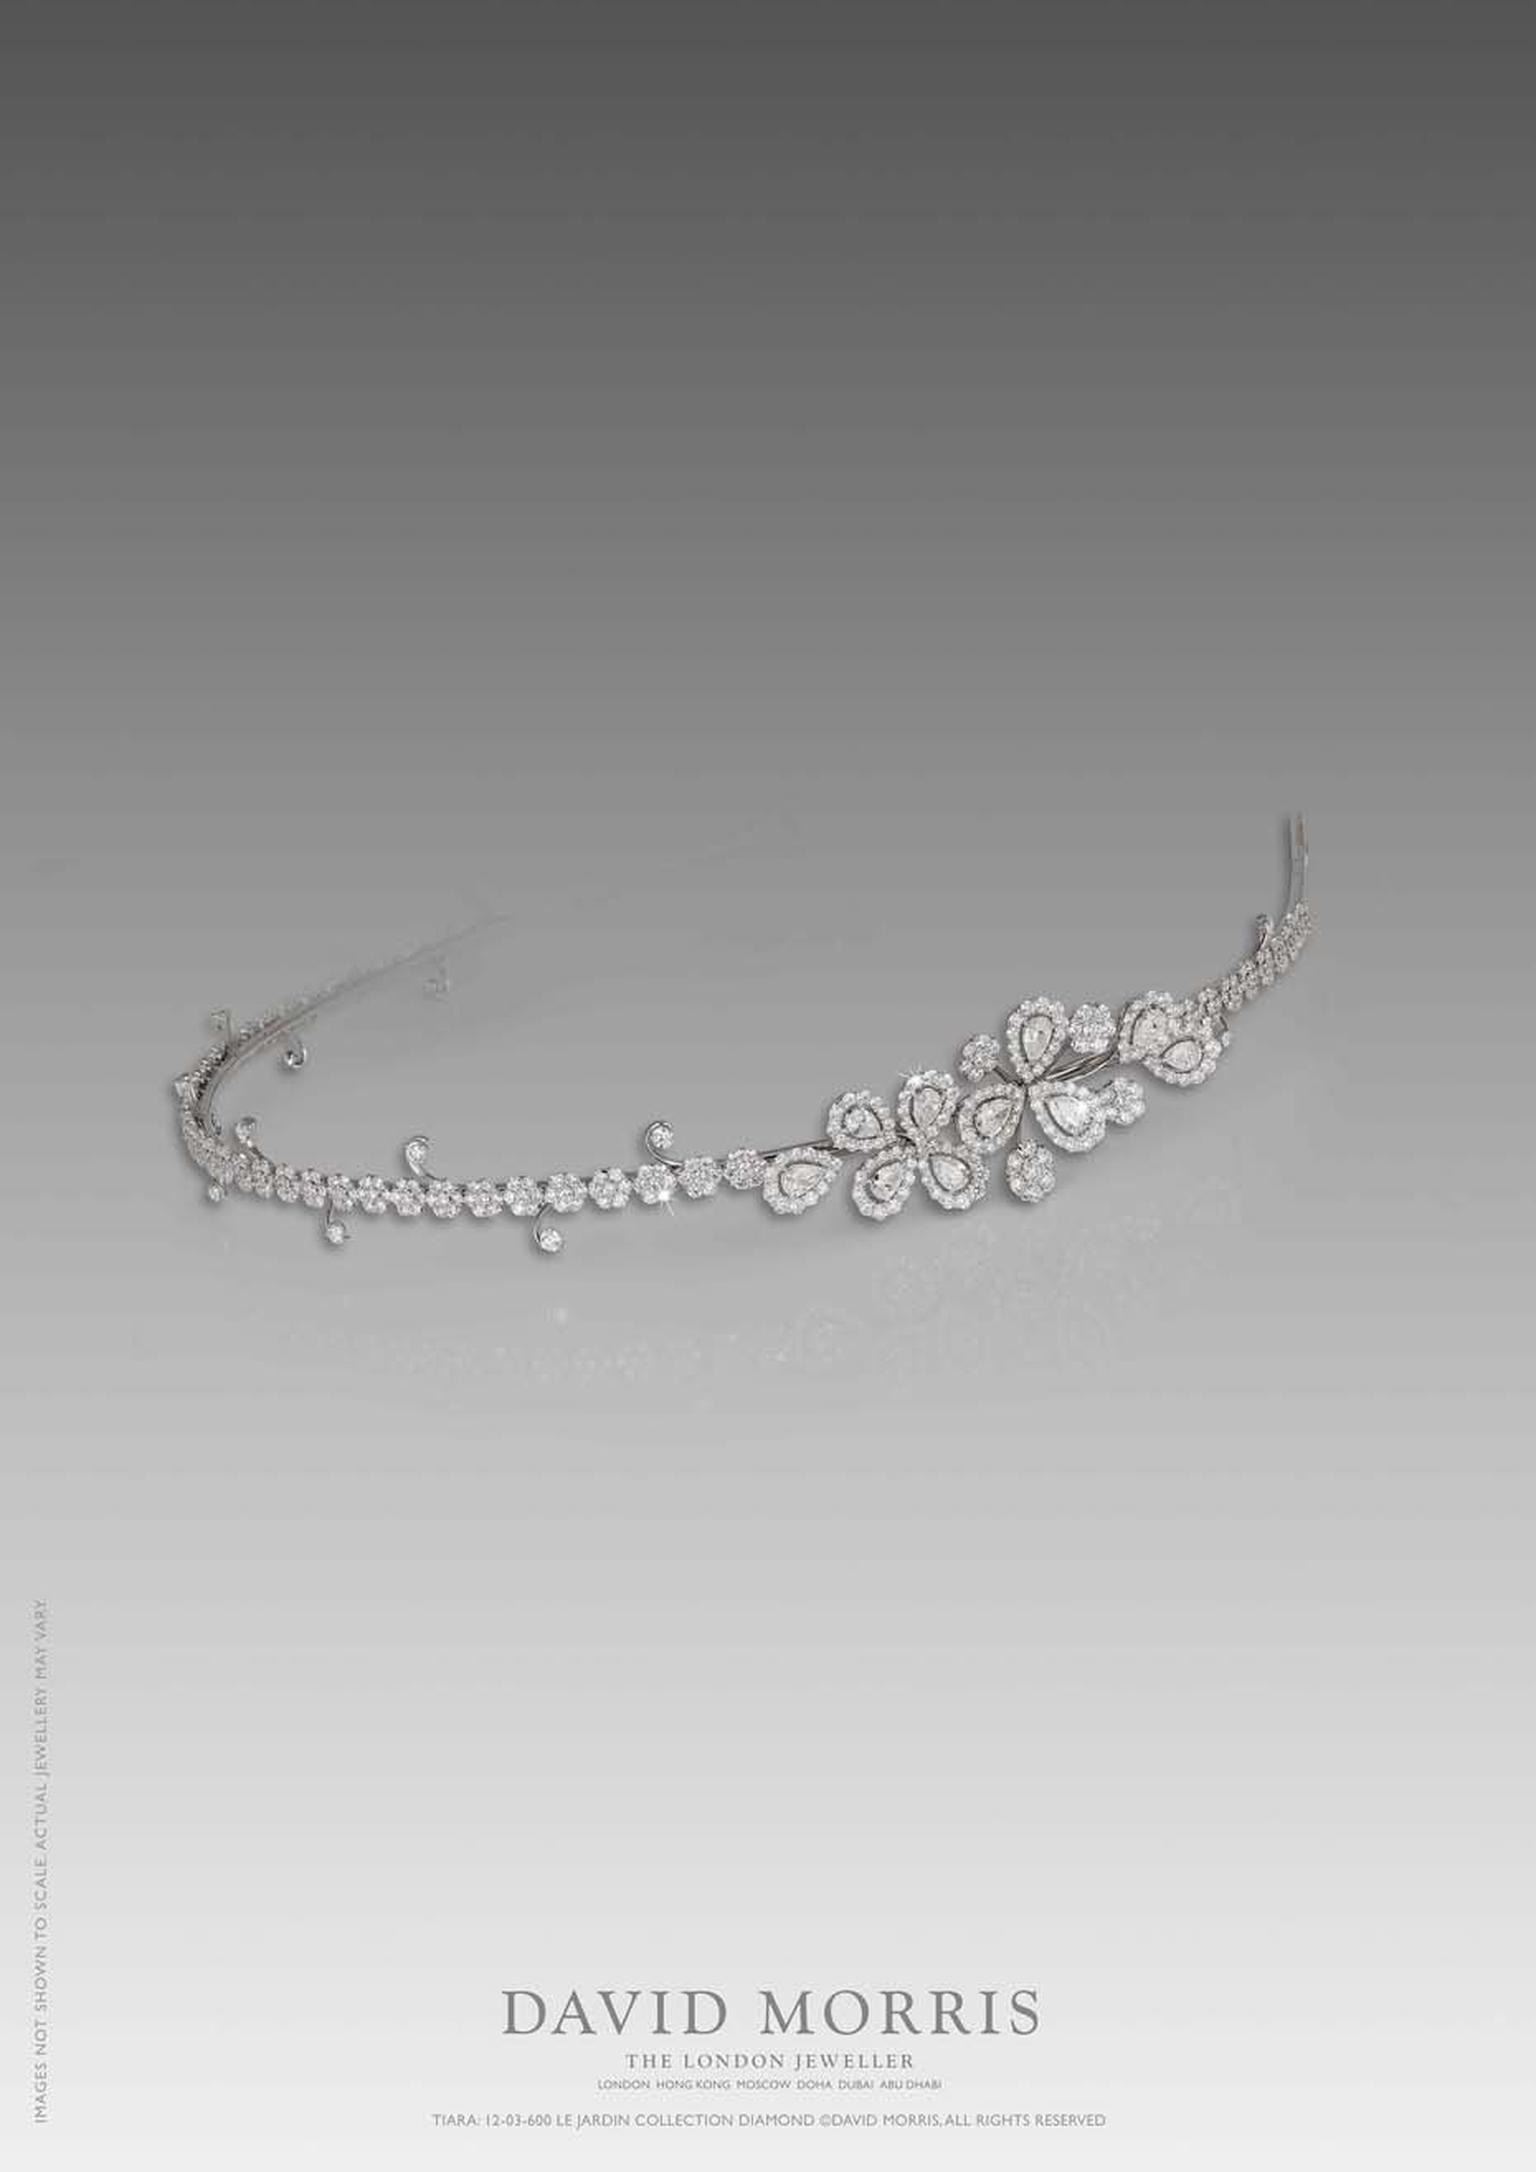 This pretty white gold and diamond headpiece from David Morris jewellery would make a stunning bridal tiara.